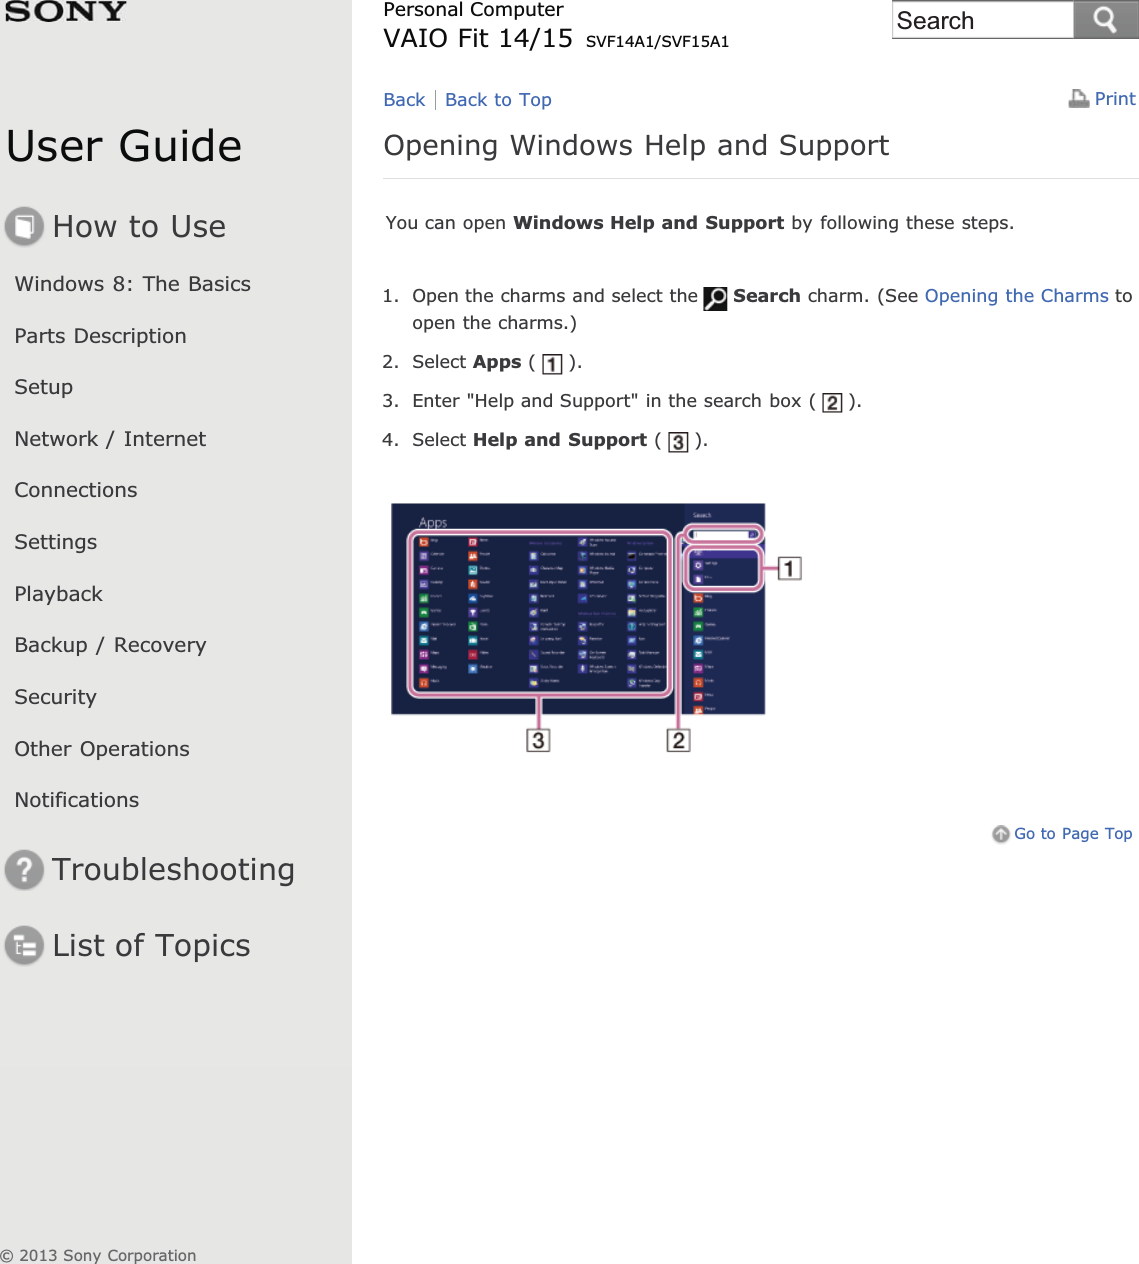 User GuideHow to UseWindows 8: The BasicsParts DescriptionSetupNetwork / InternetConnectionsSettingsPlaybackBackup / RecoverySecurityOther OperationsNotificationsTroubleshootingList of TopicsPrintPersonal ComputerVAIO Fit 14/15 SVF14A1/SVF15A1Opening Windows Help and SupportYou can open Windows Help and Support by following these steps.1. Open the charms and select the Search charm. (See Opening the Charms toopen the charms.)2. Select Apps ( ).3. Enter &quot;Help and Support&quot; in the search box ( ).4. Select Help and Support ( ).Go to Page TopBack Back to Top© 2013 Sony CorporationSearch